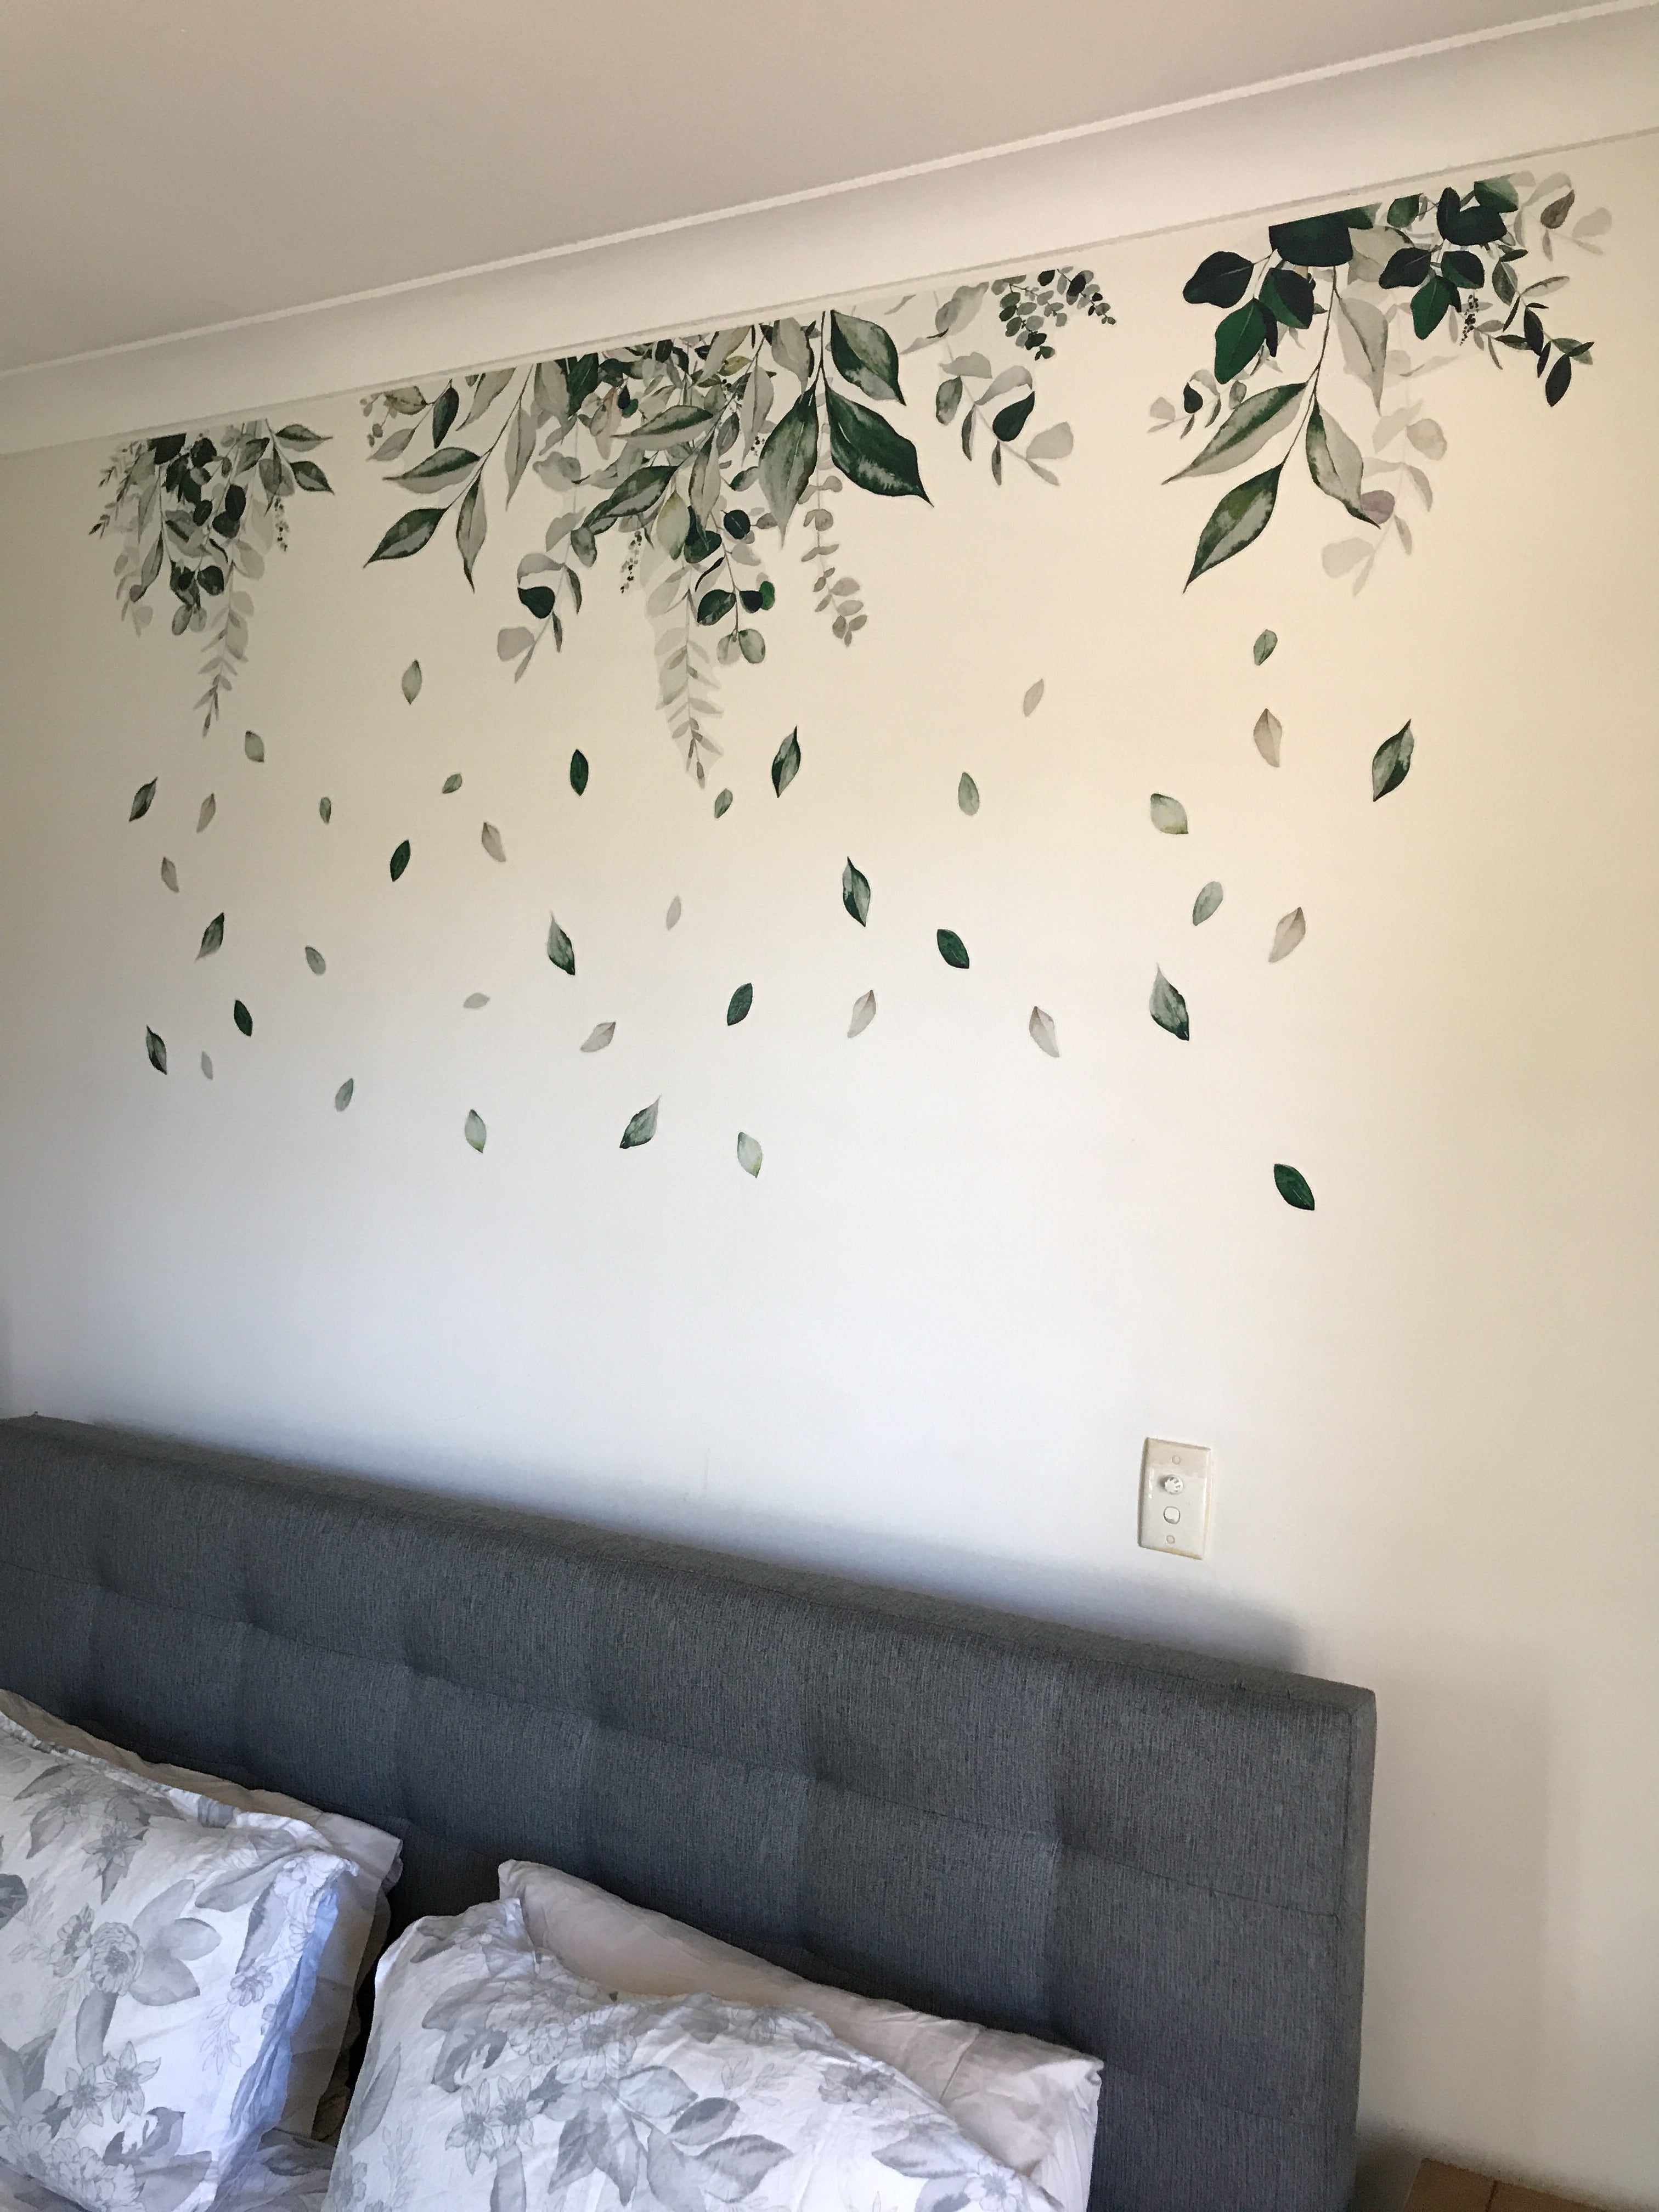 Greenery Wall Decals